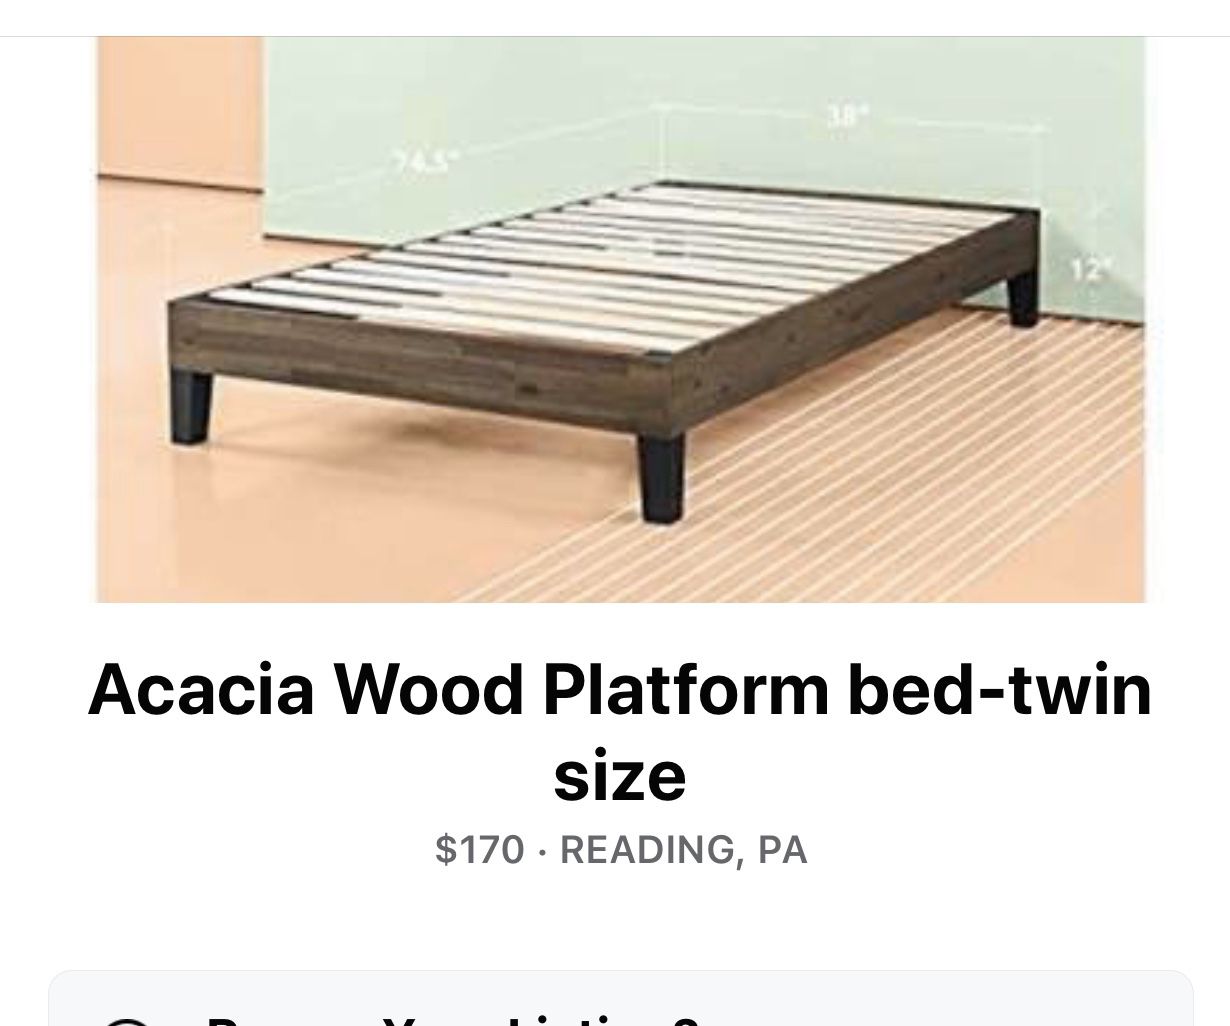 Brand new in box Acacia Wood Bed Frame